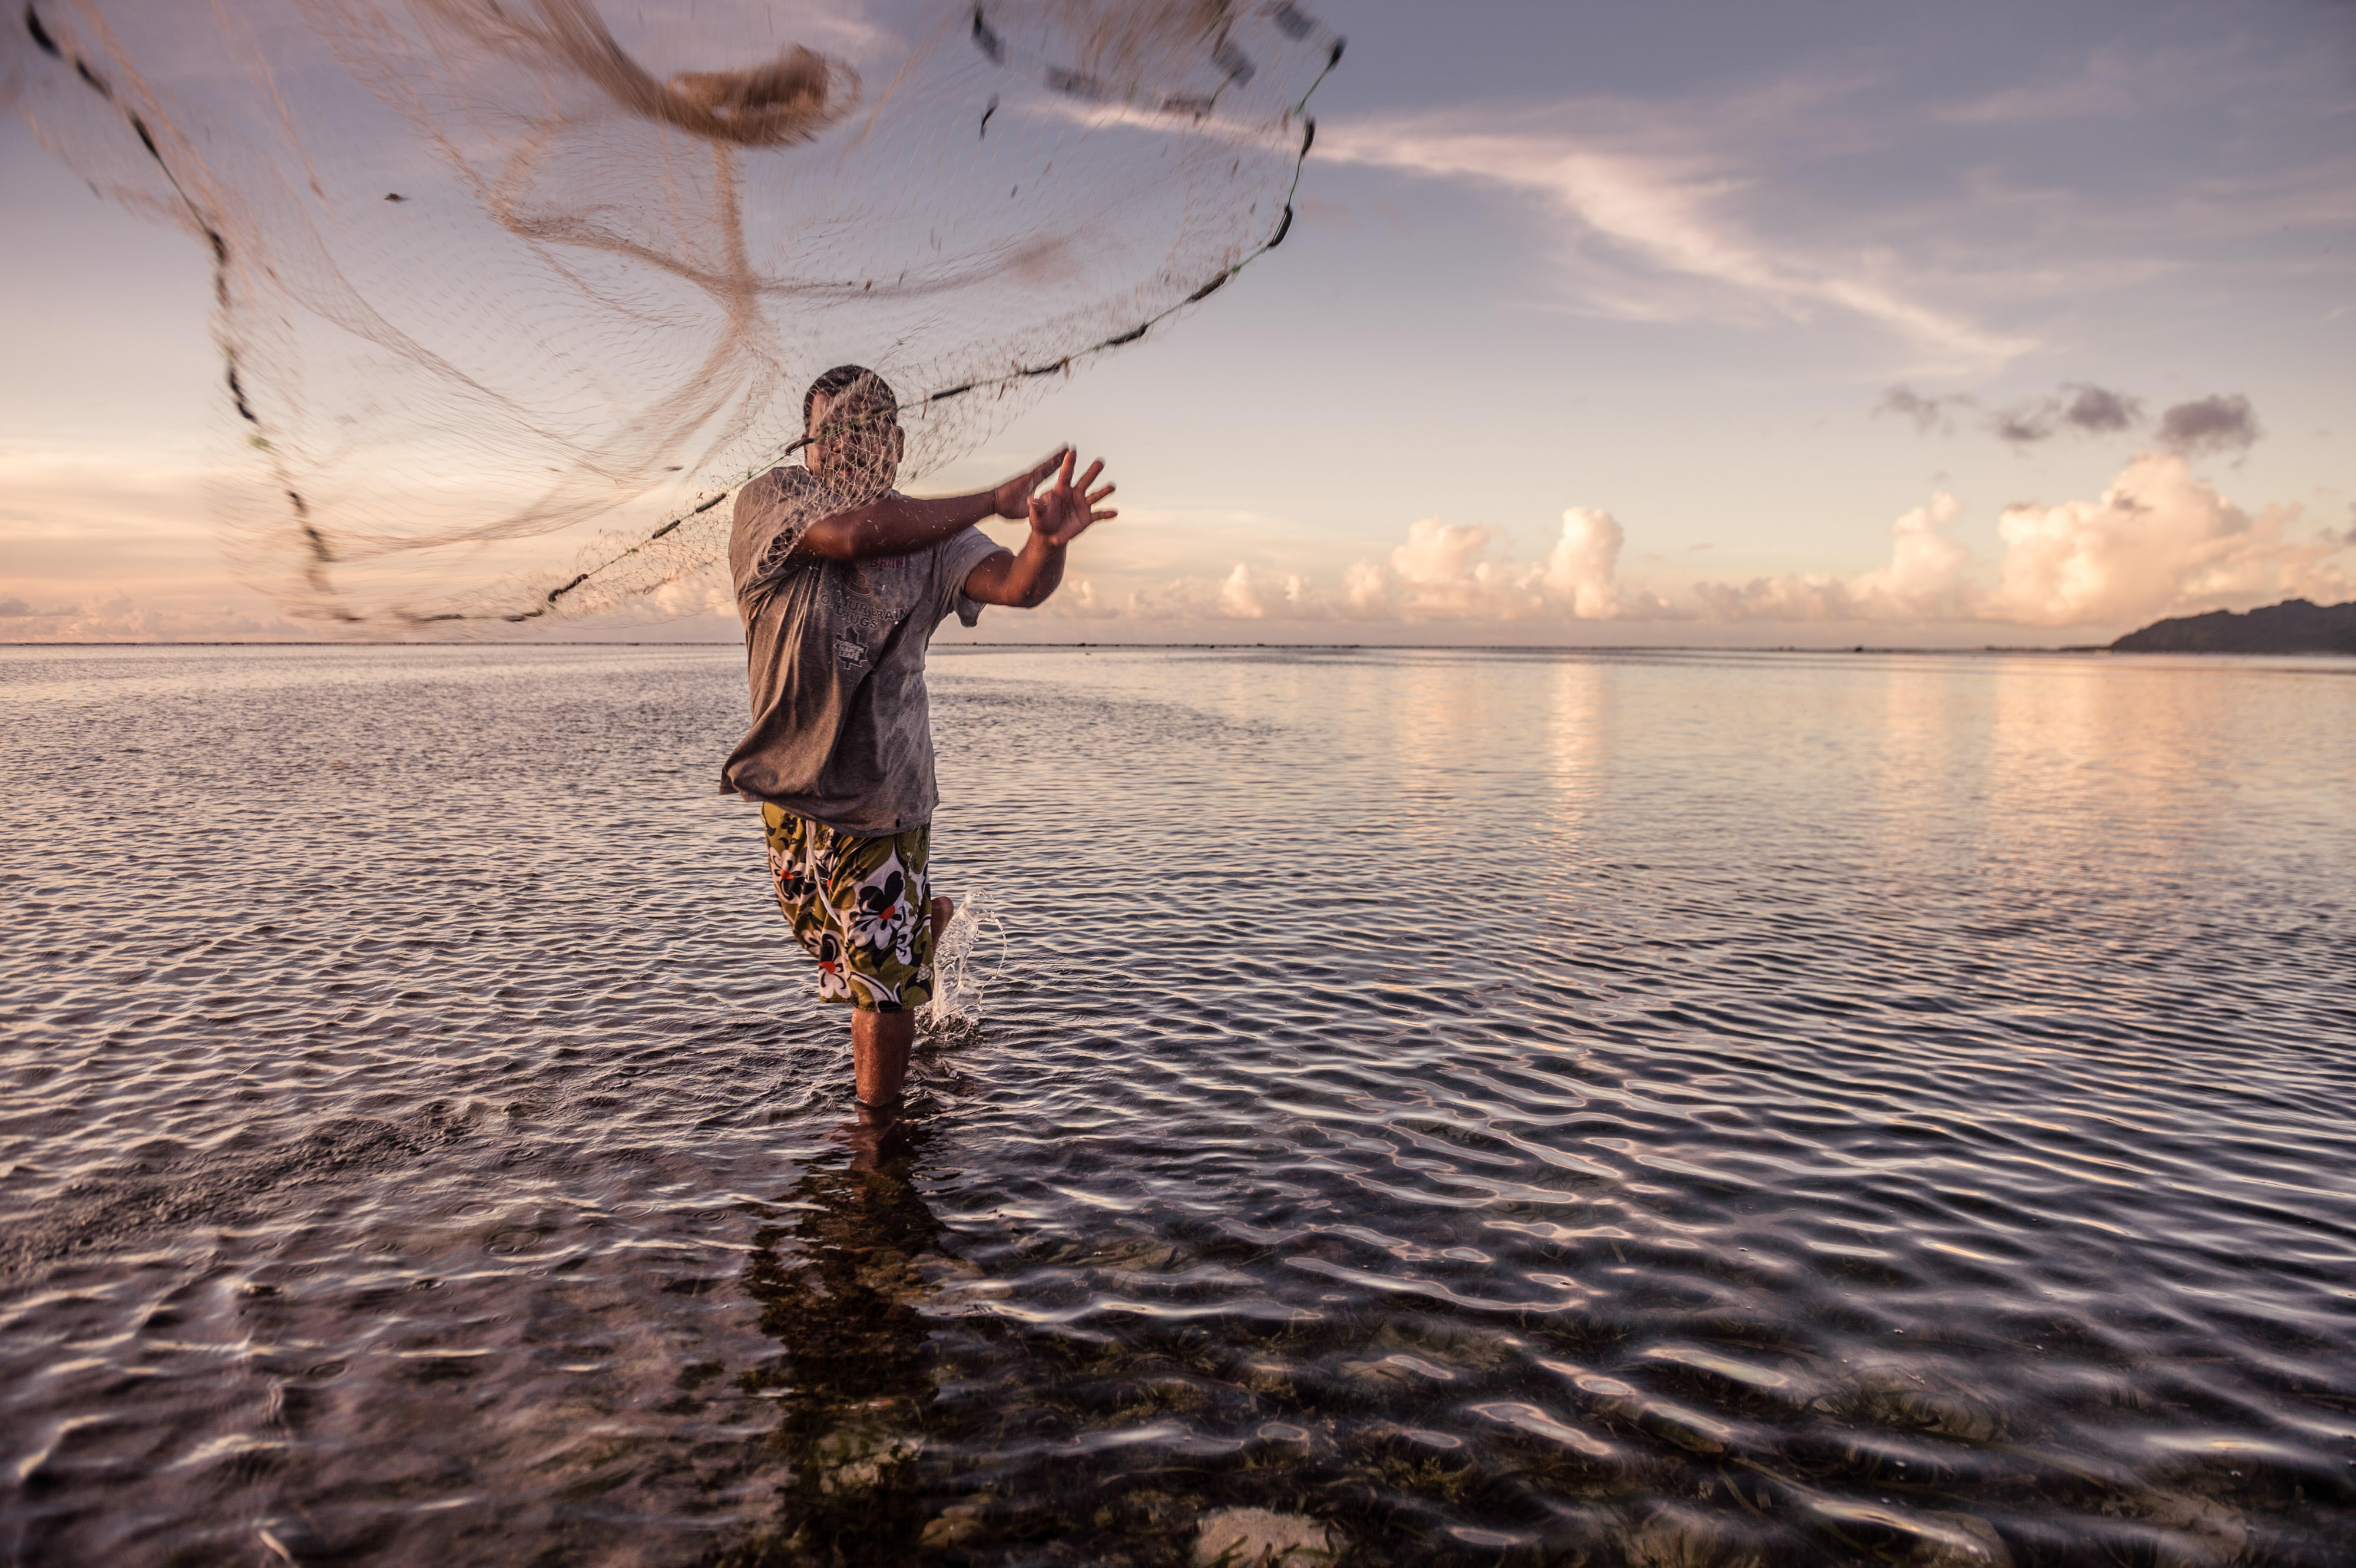 A reef fisherman from Walalung Village on the island of Kosrae, Micronesia.